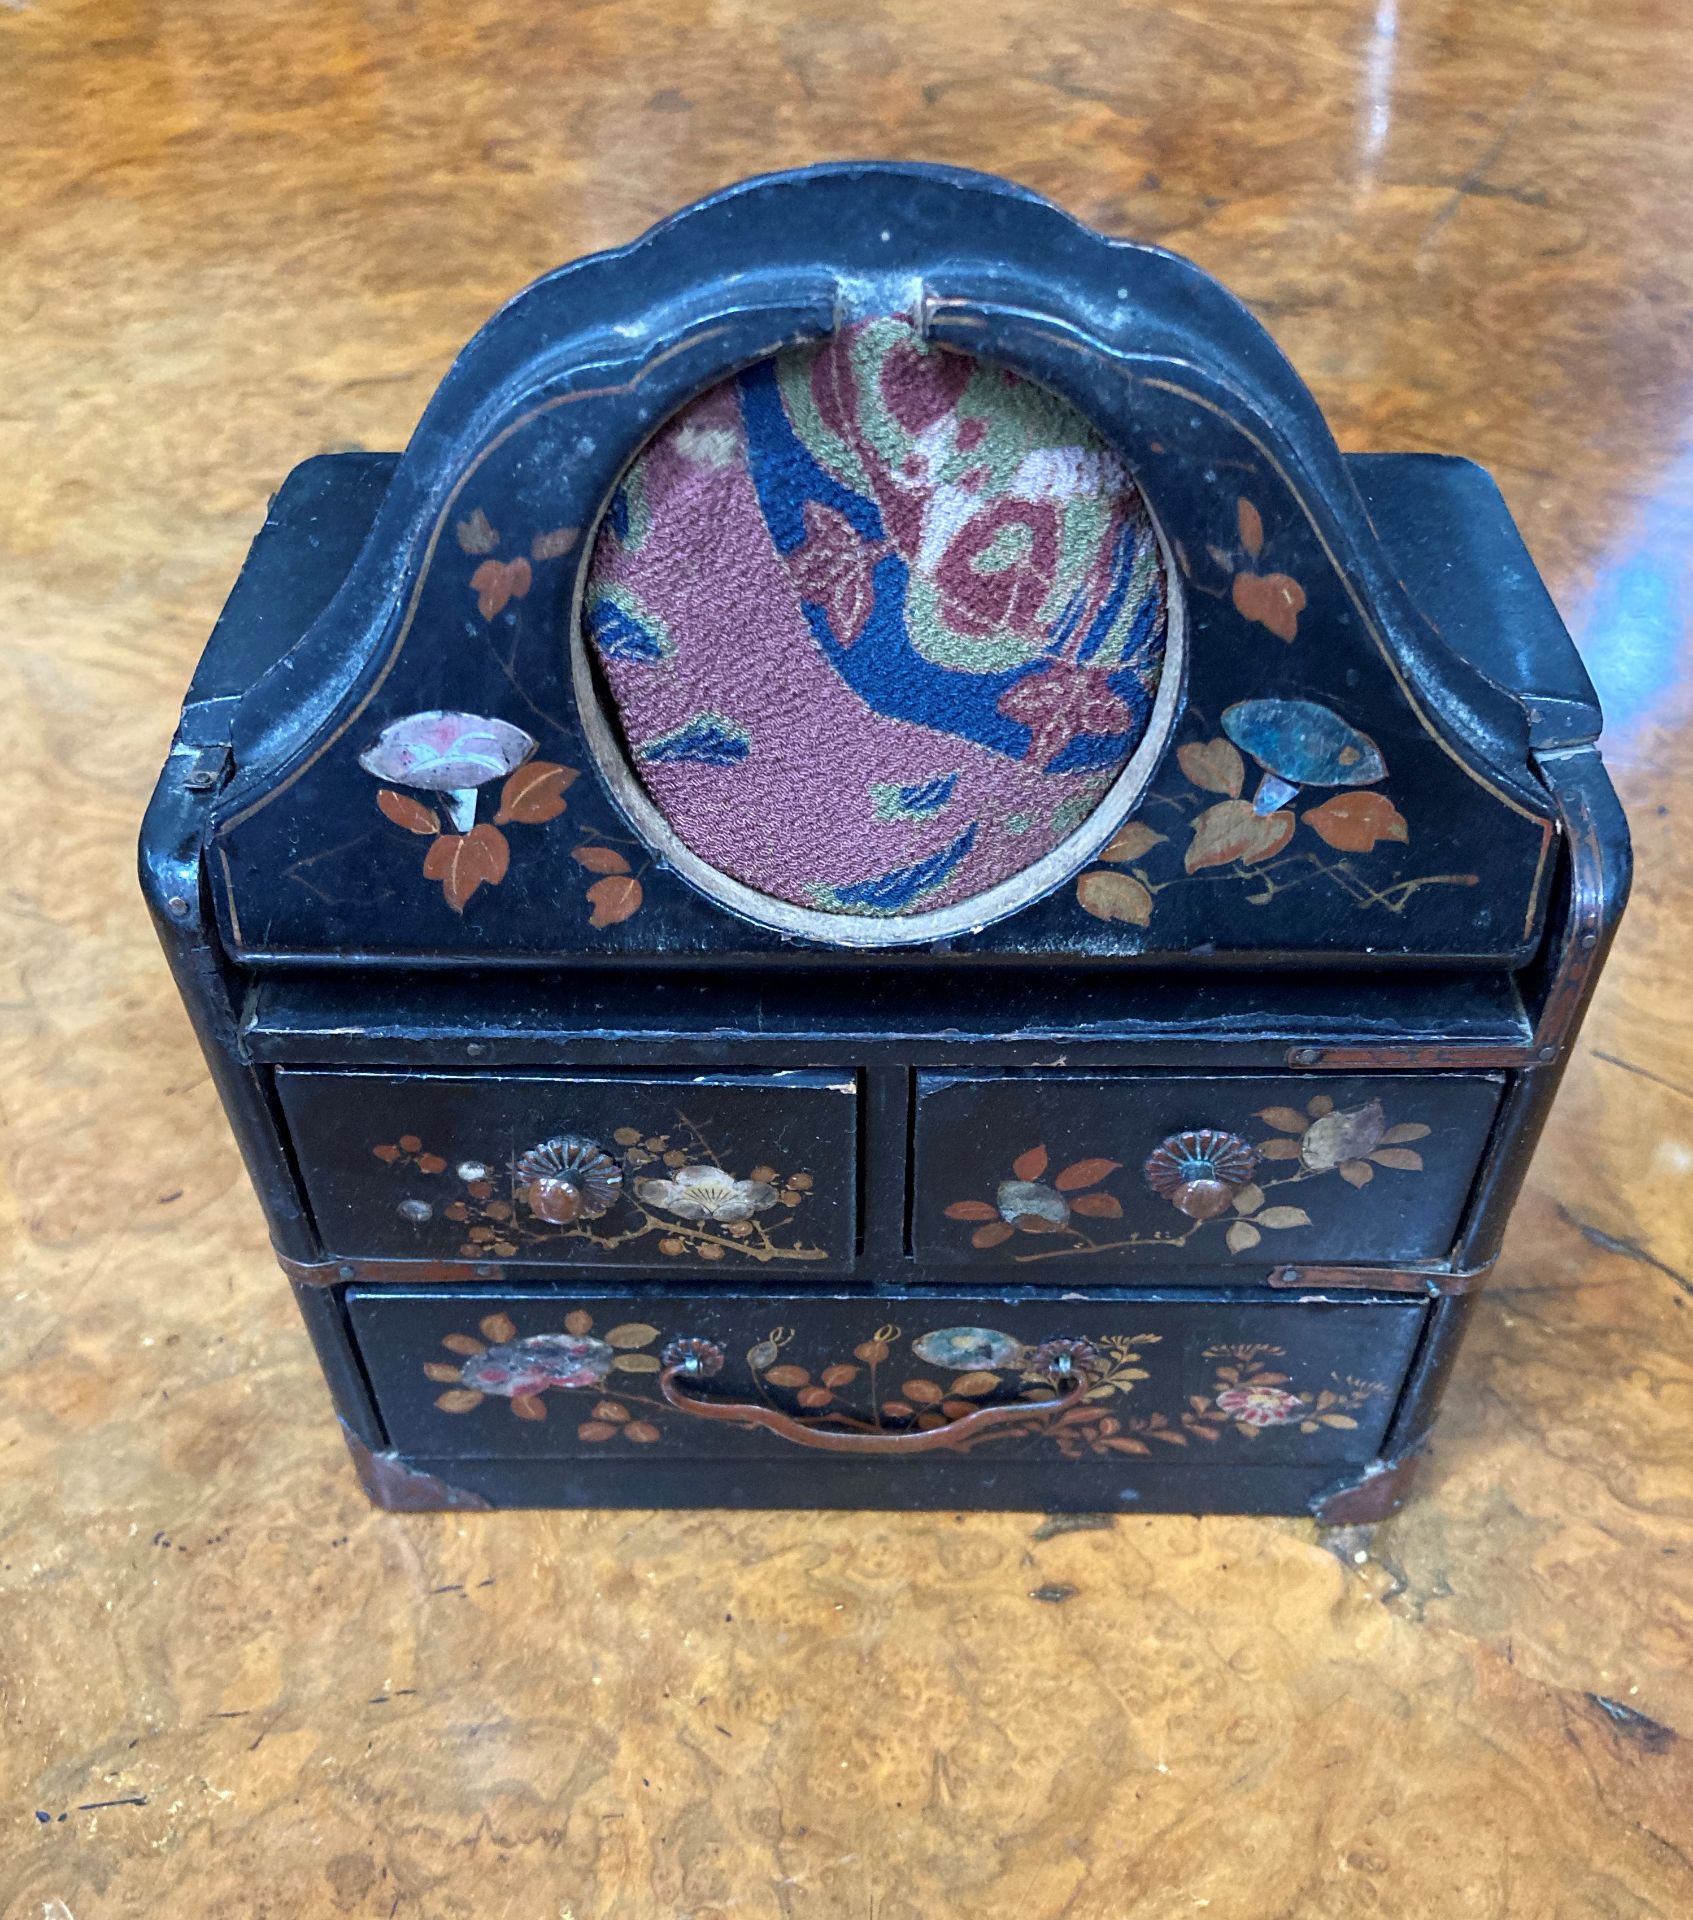 AN EARLY 20TH CENTURY JAPANESE LACQUER POCKET WATCH HOLDER - Image 2 of 2